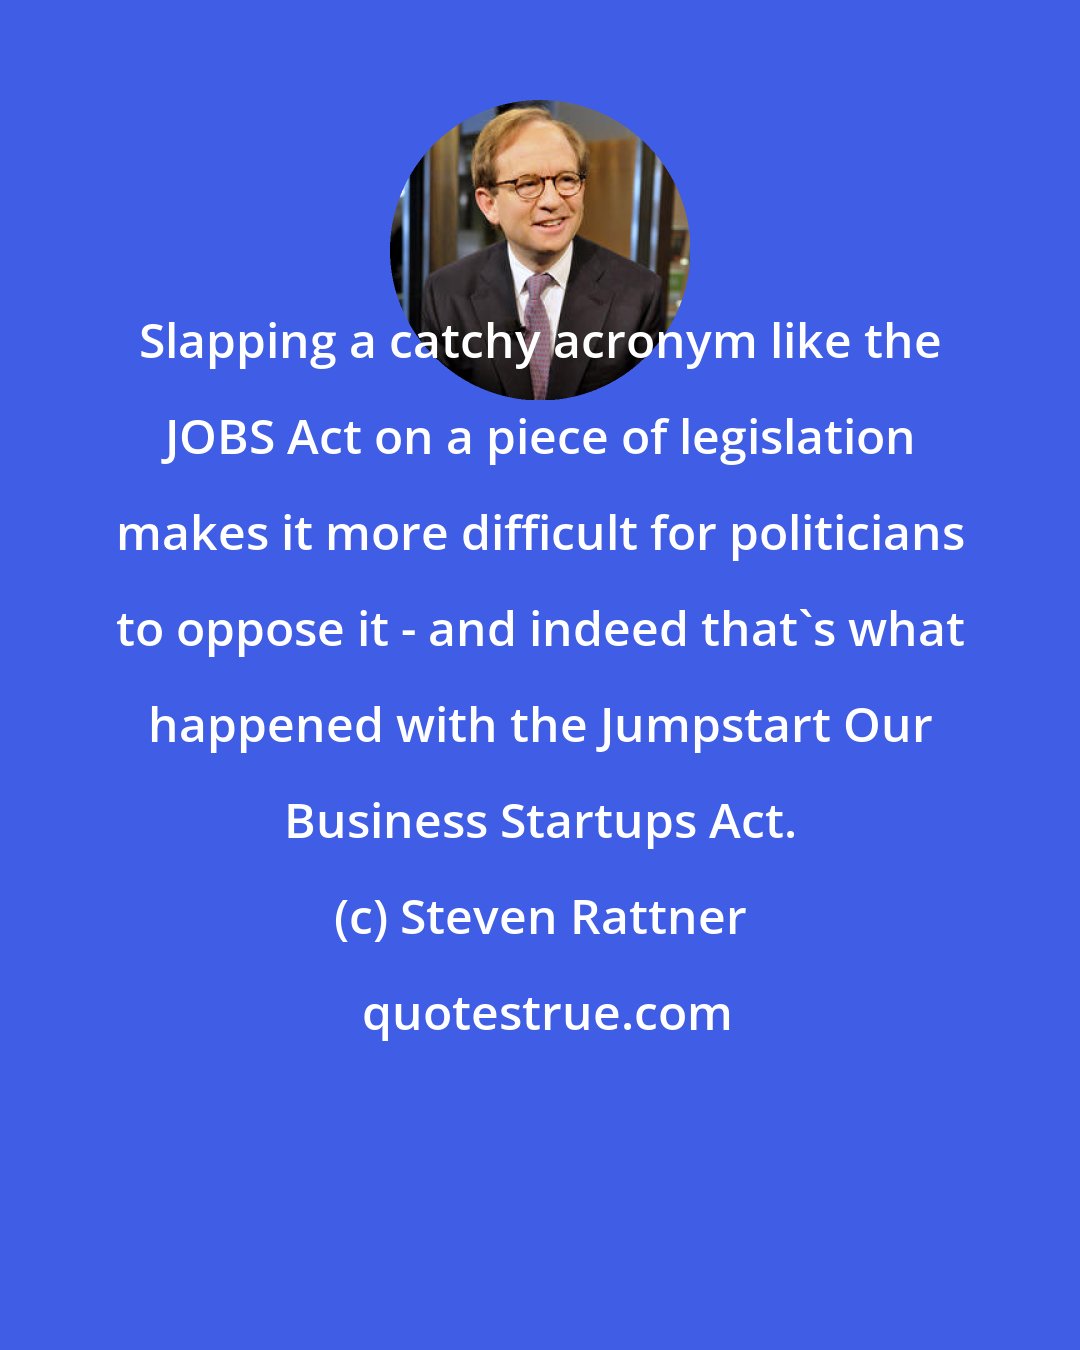 Steven Rattner: Slapping a catchy acronym like the JOBS Act on a piece of legislation makes it more difficult for politicians to oppose it - and indeed that's what happened with the Jumpstart Our Business Startups Act.